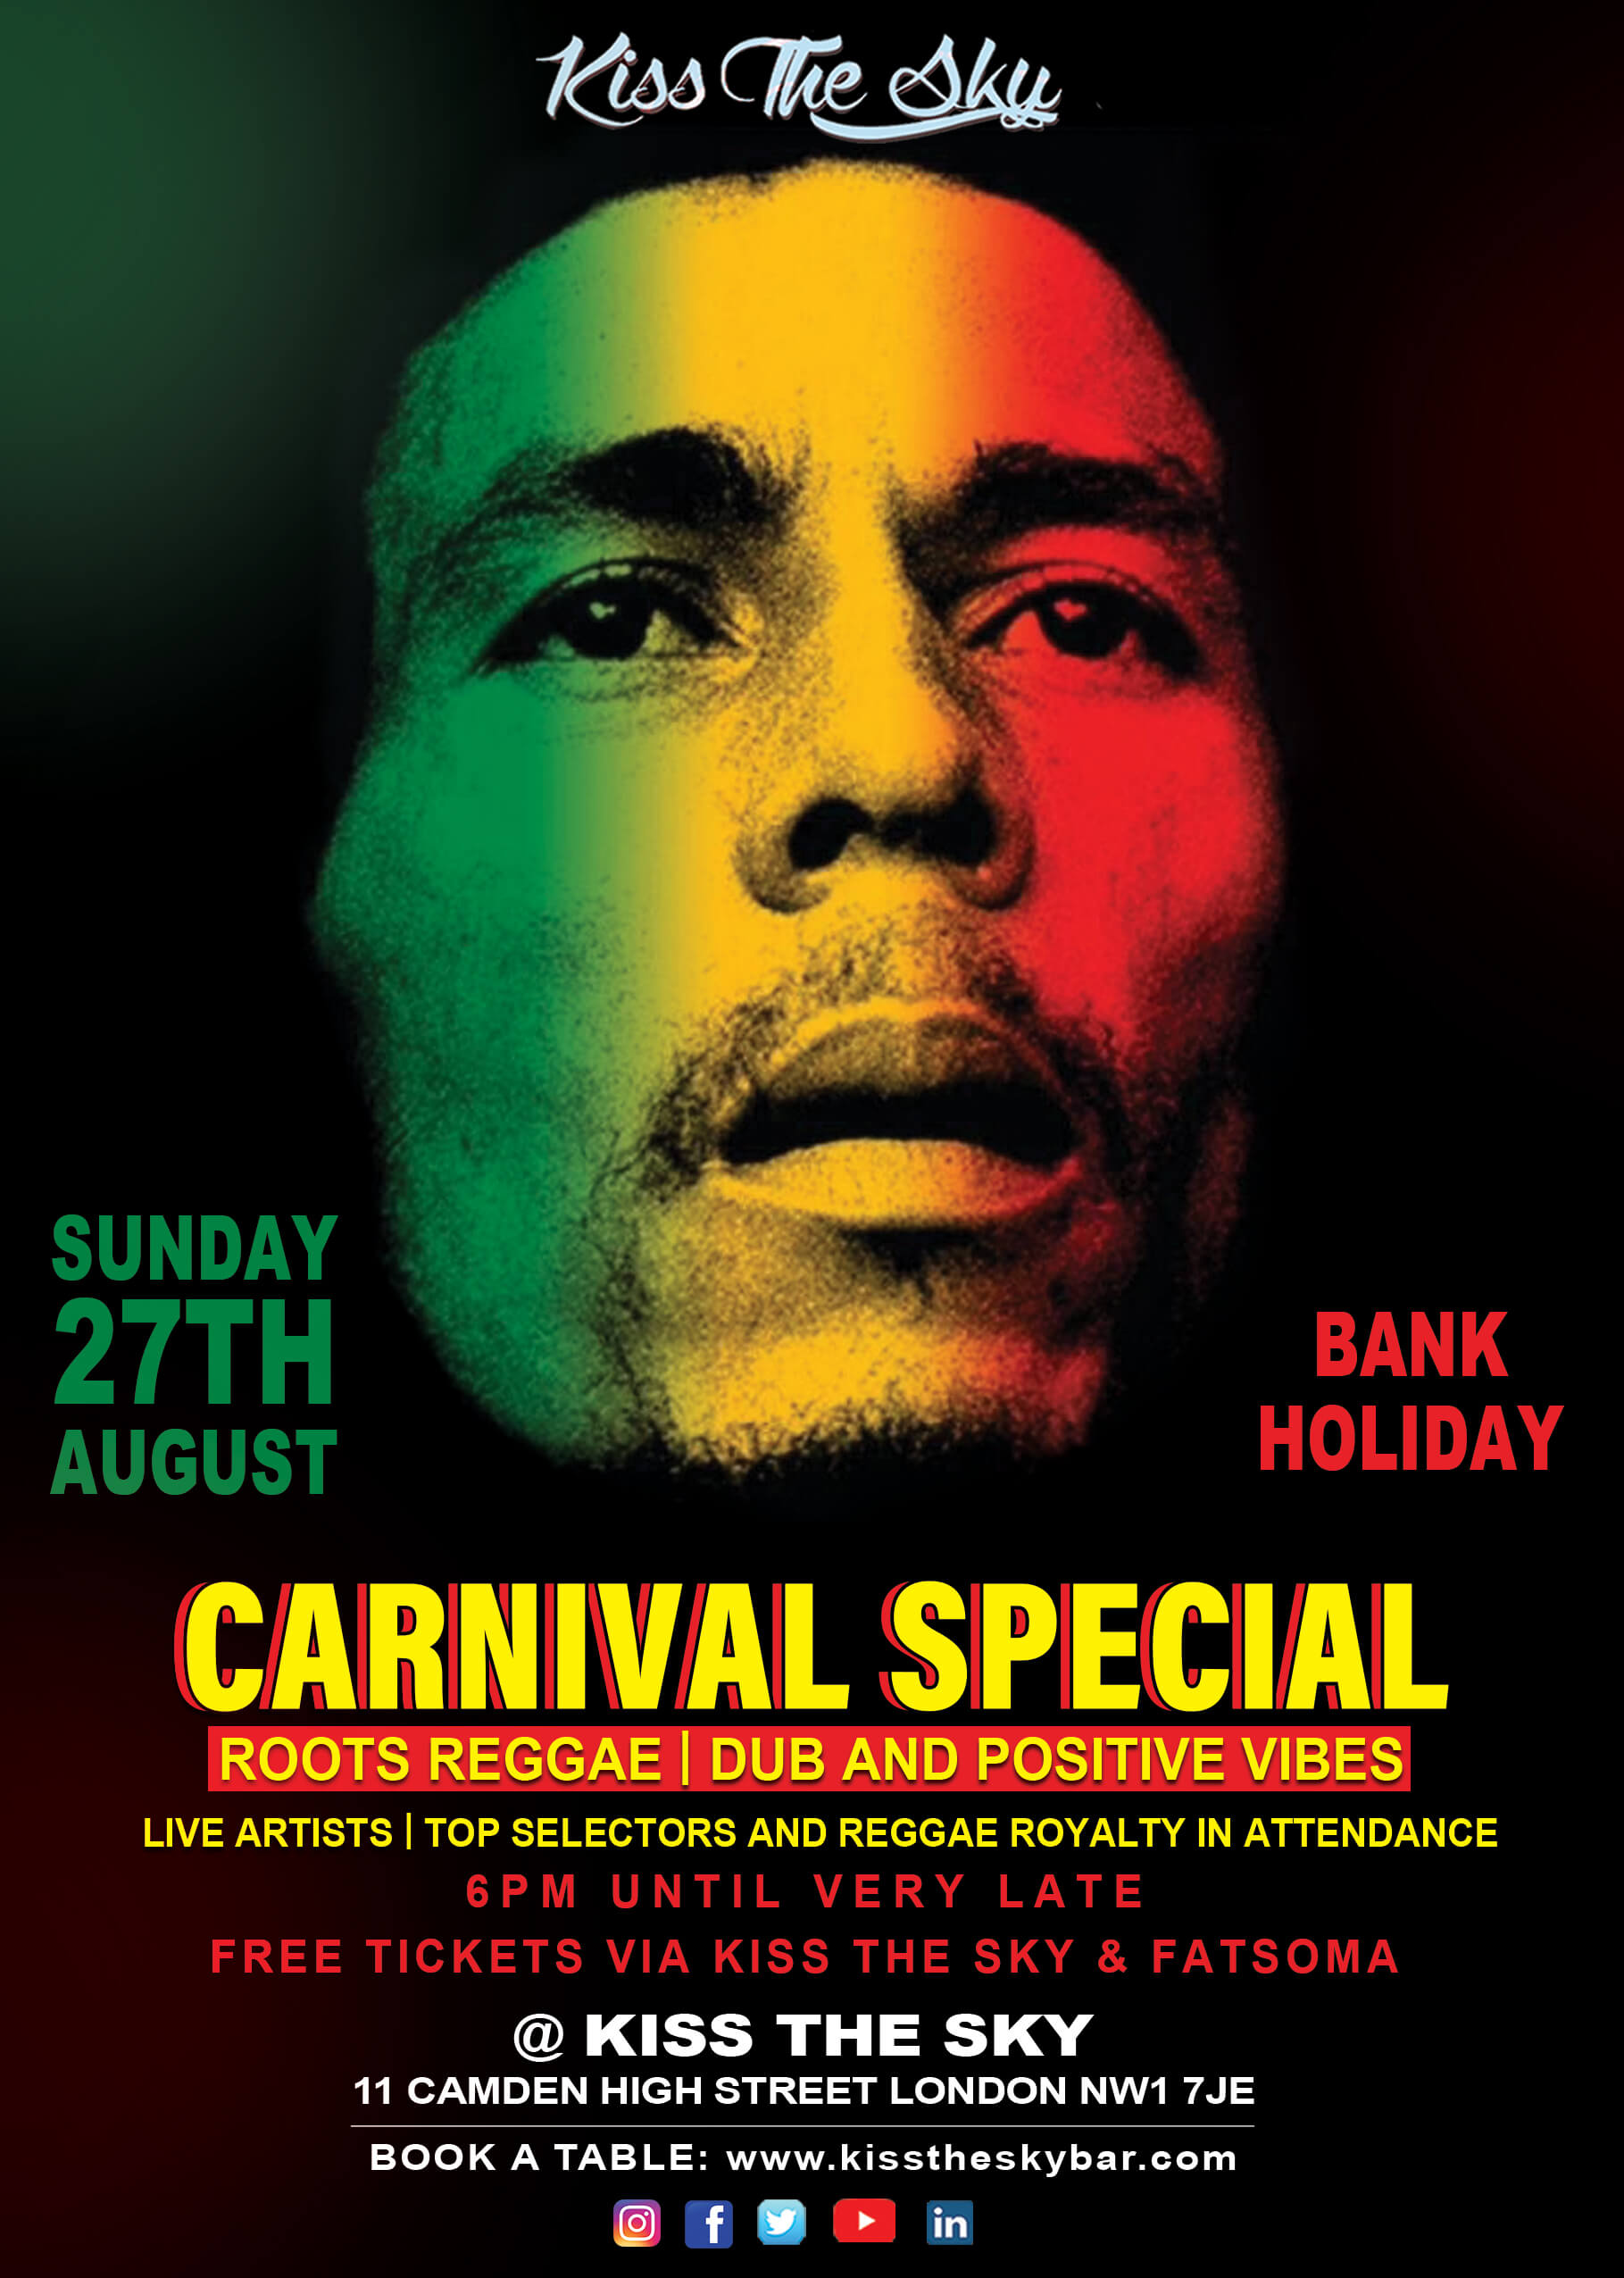 Carnival Special Roots Reggae | Dub and Positive Vibes